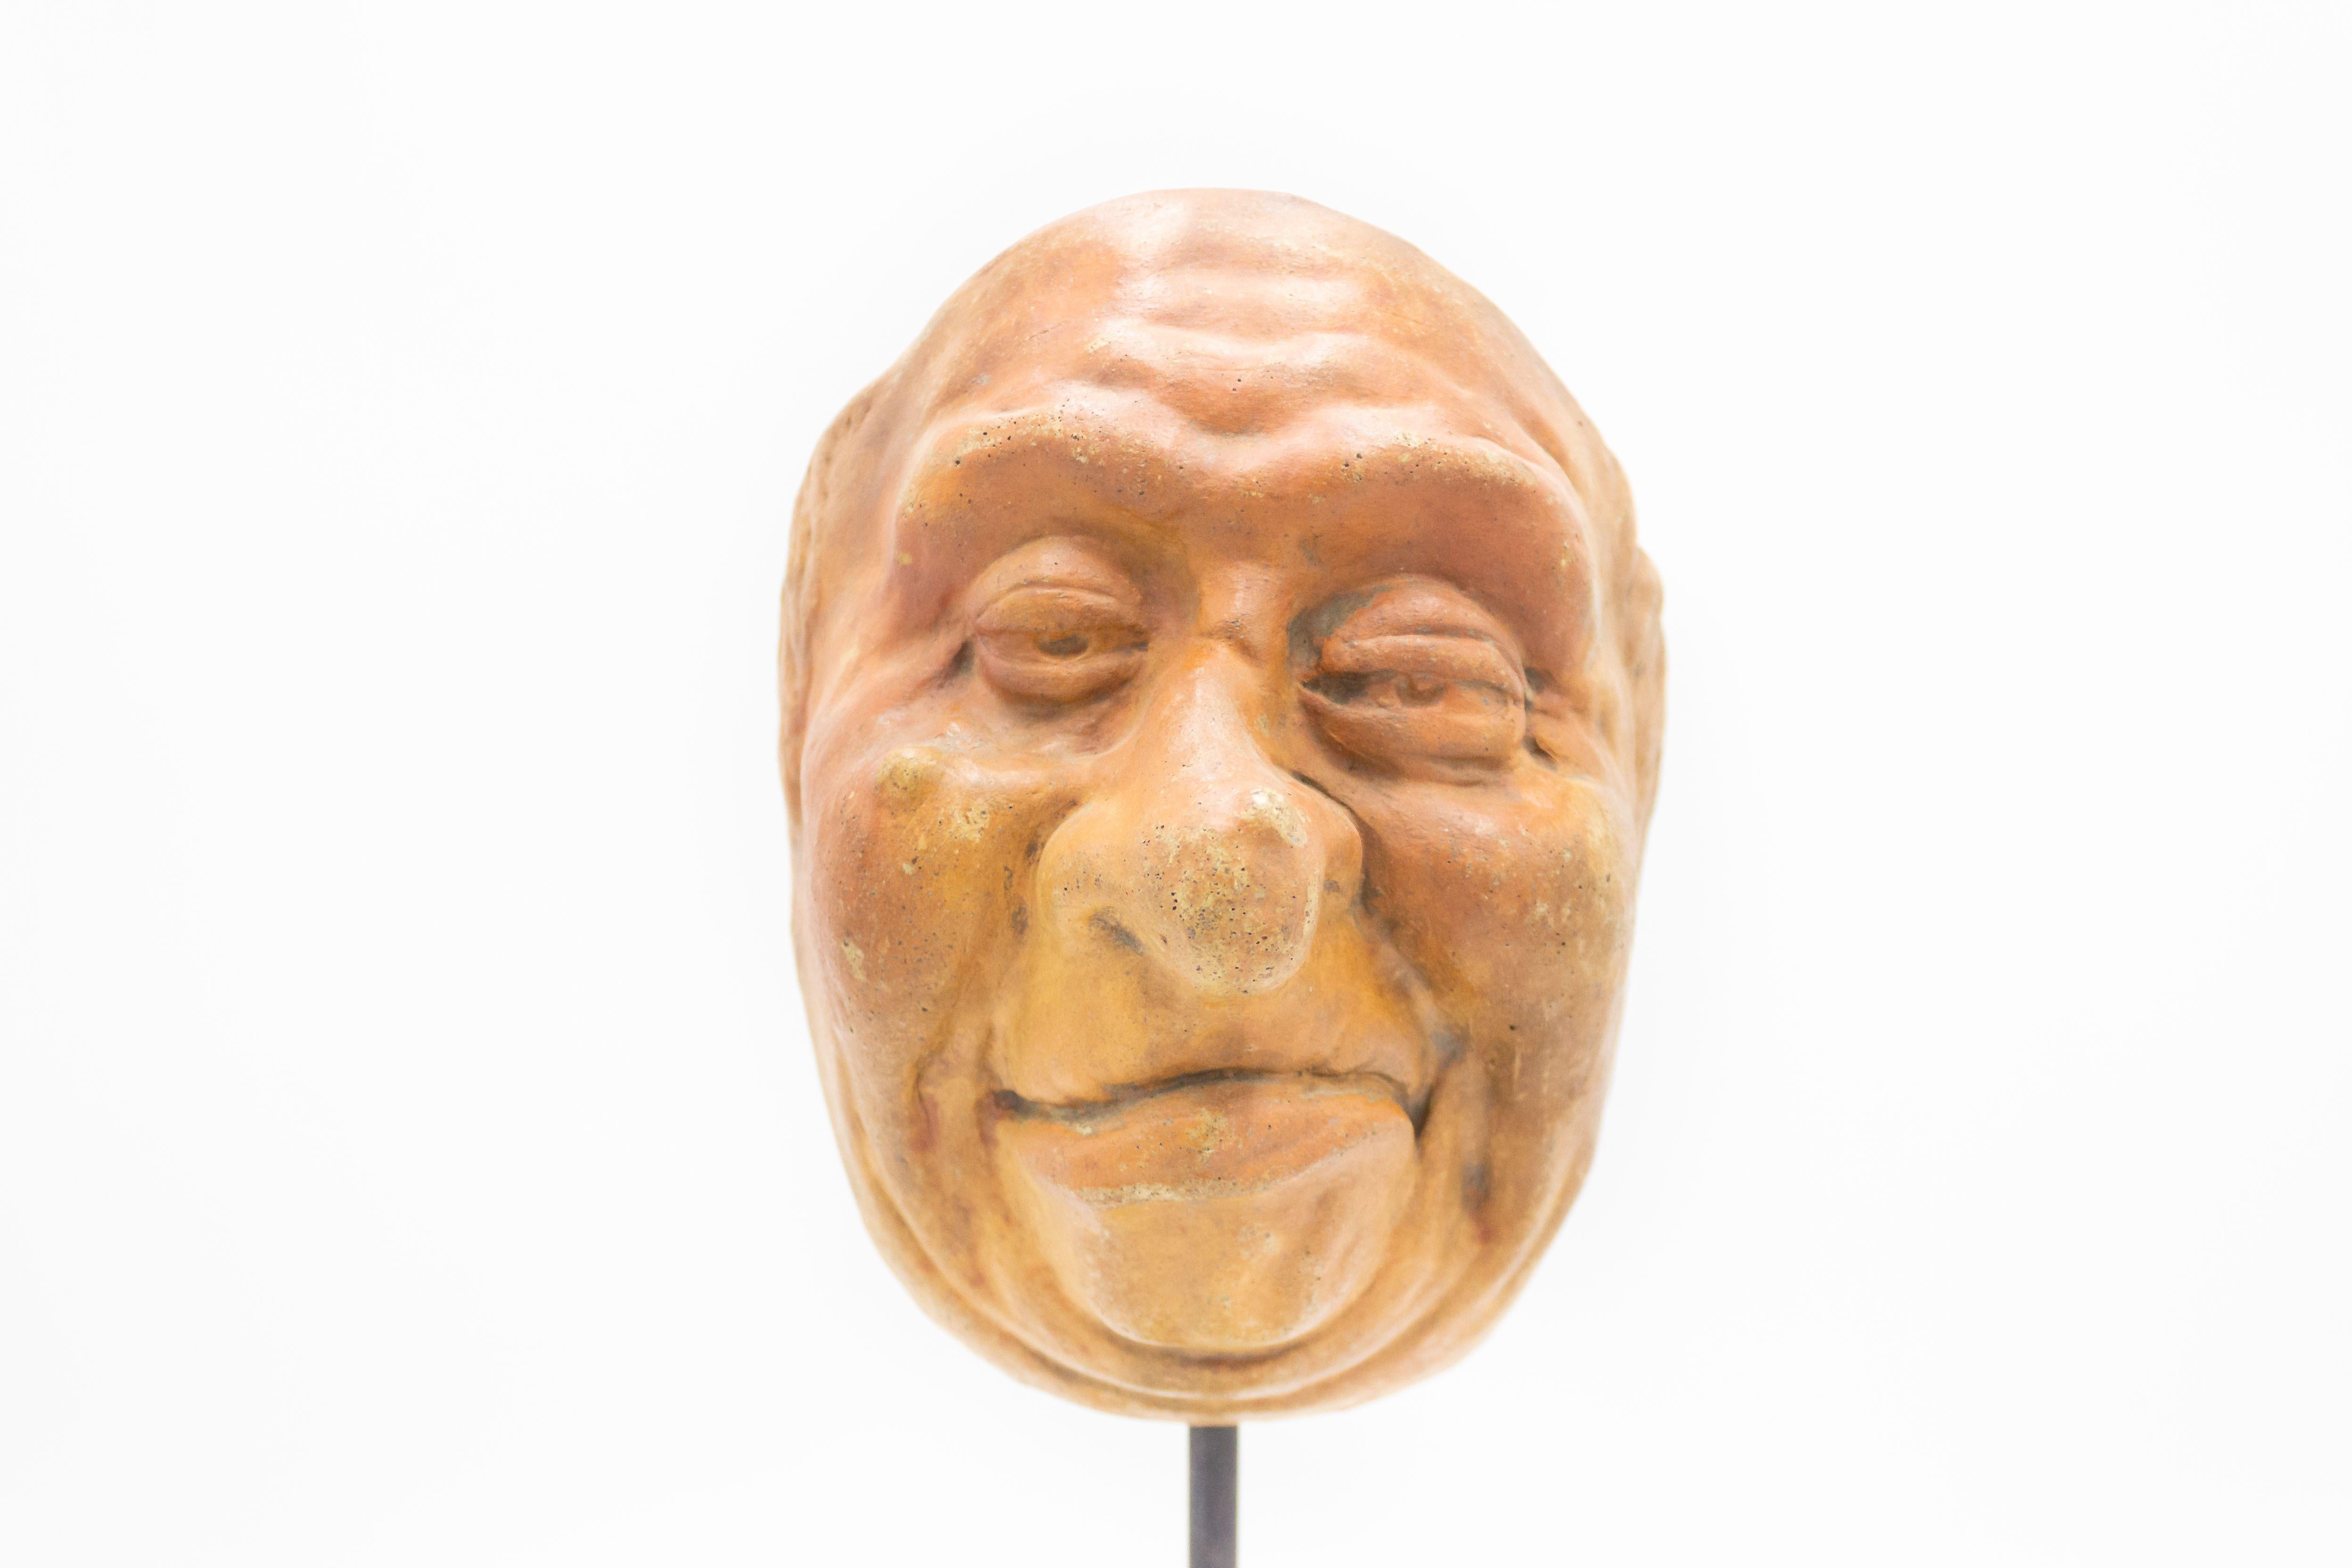 Continental German (late 19th Cent) sculpted terra-cotta master mask mold of a smiling Grotesque face with a wart on nose displayed on a square black marble base stand (part of a 39 piece collection).
 